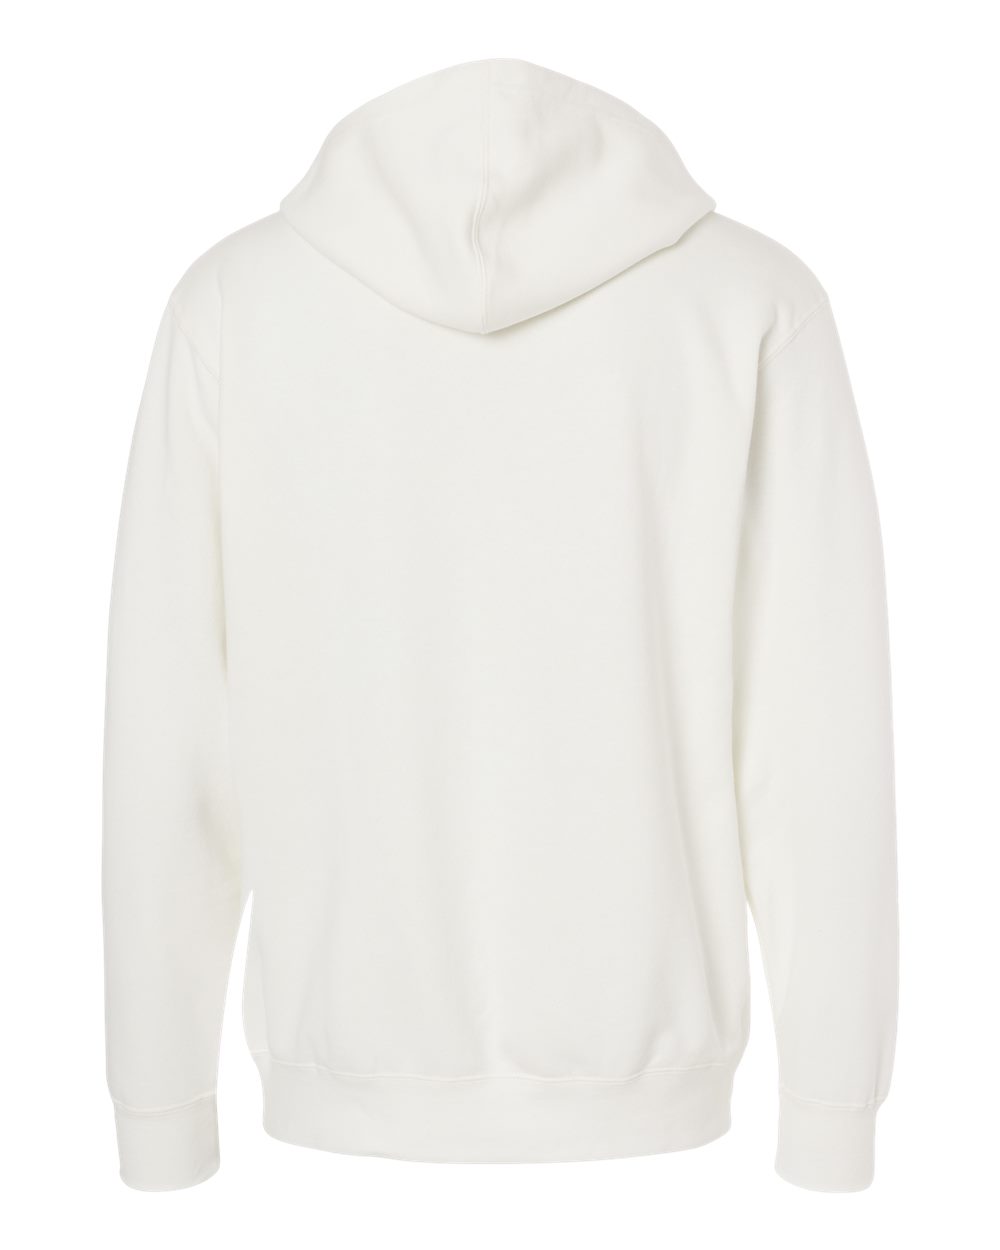 Independent Trading Co. PRM4500 - Midweight Pigment-Dyed Hooded 